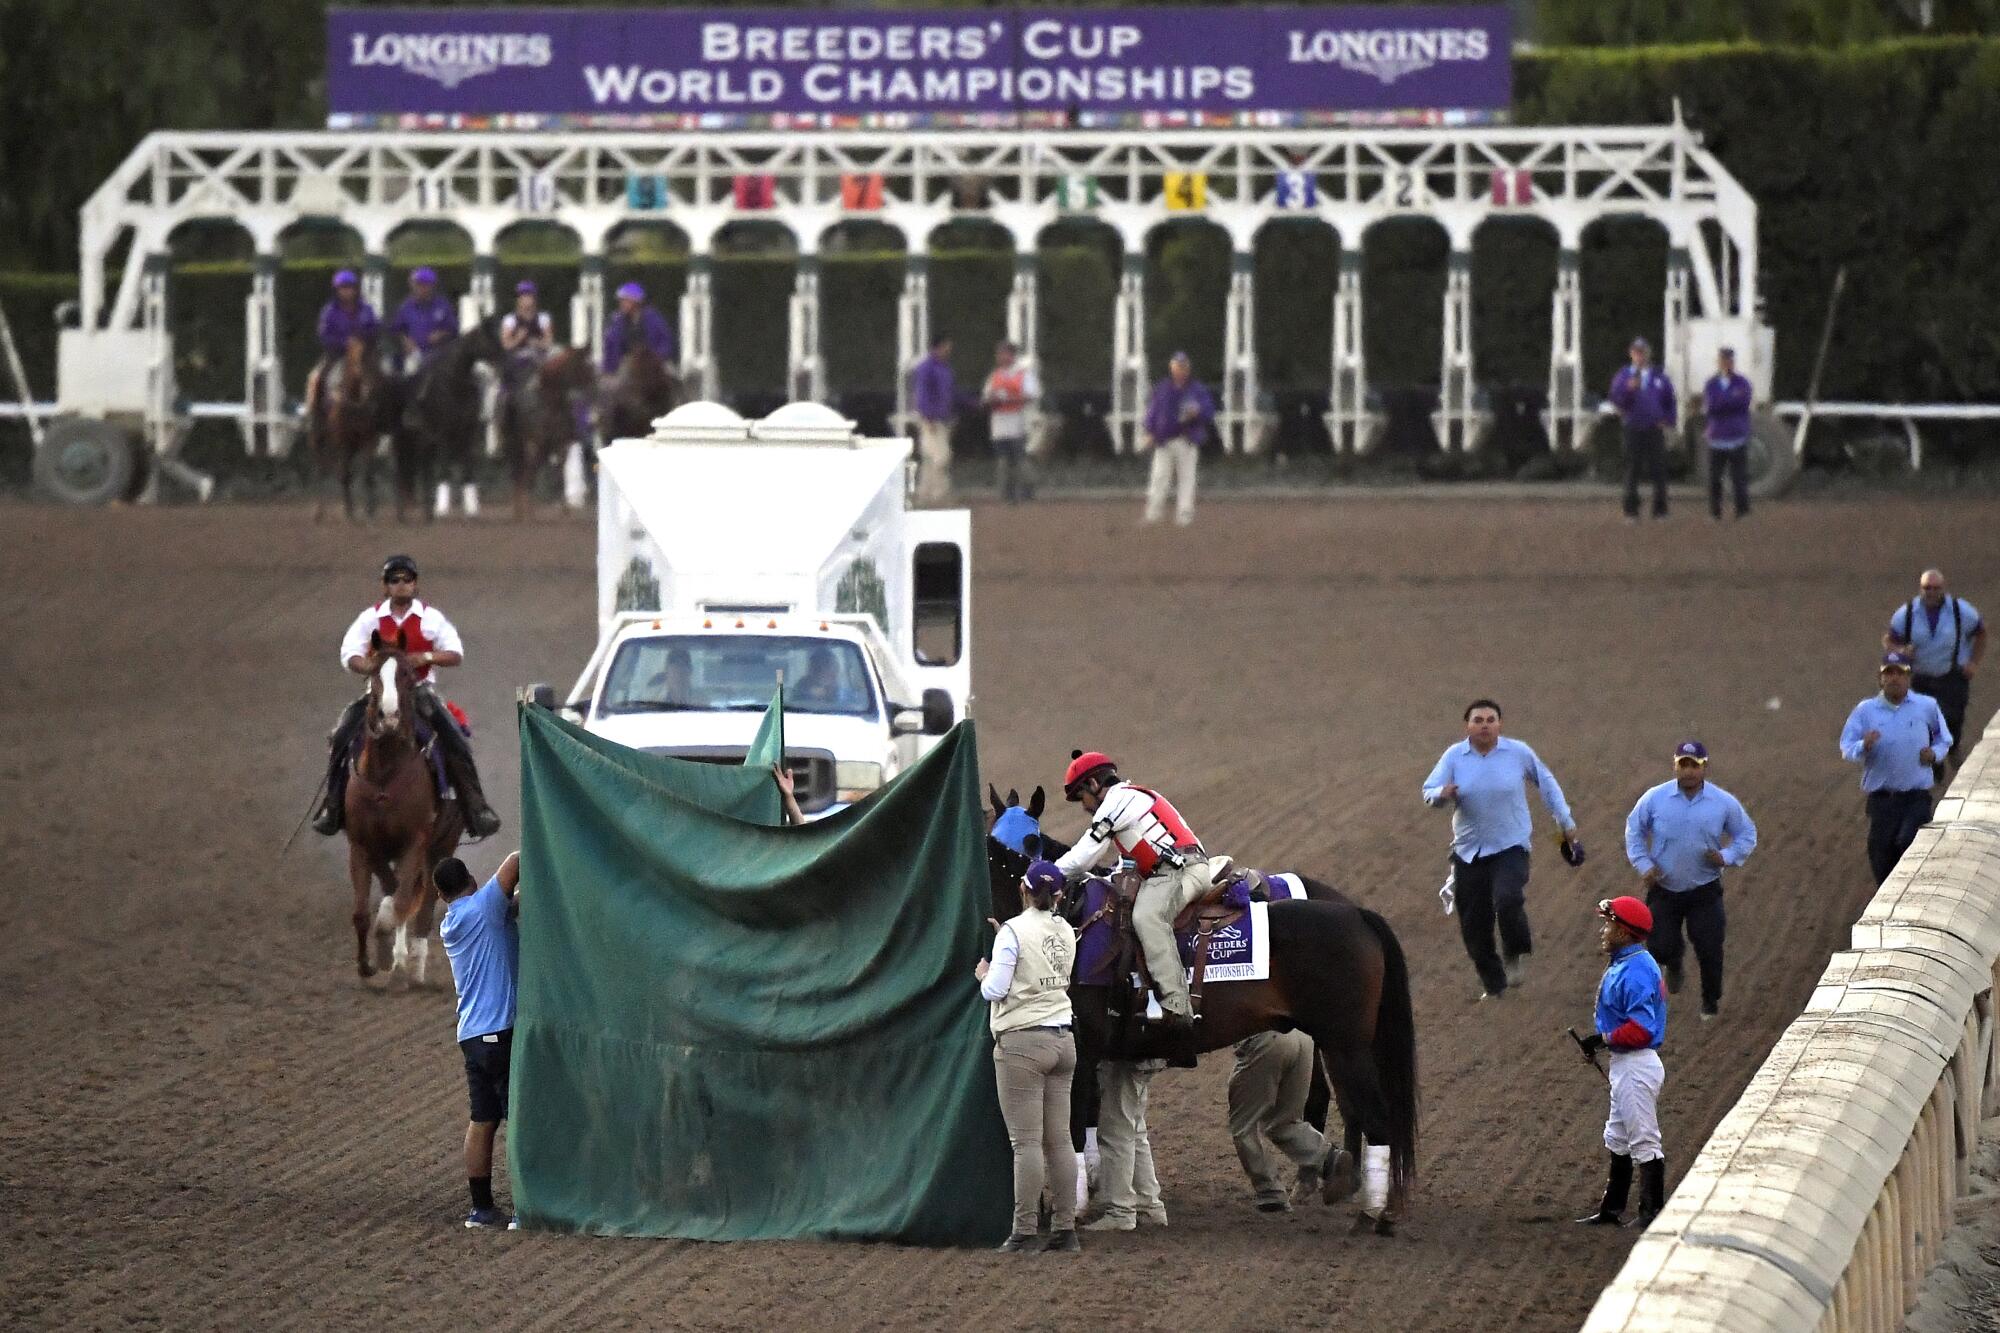 Track workers treat Mongolian Groom after the horse was injured during the Breeders' Cup at Santa Anita Park.